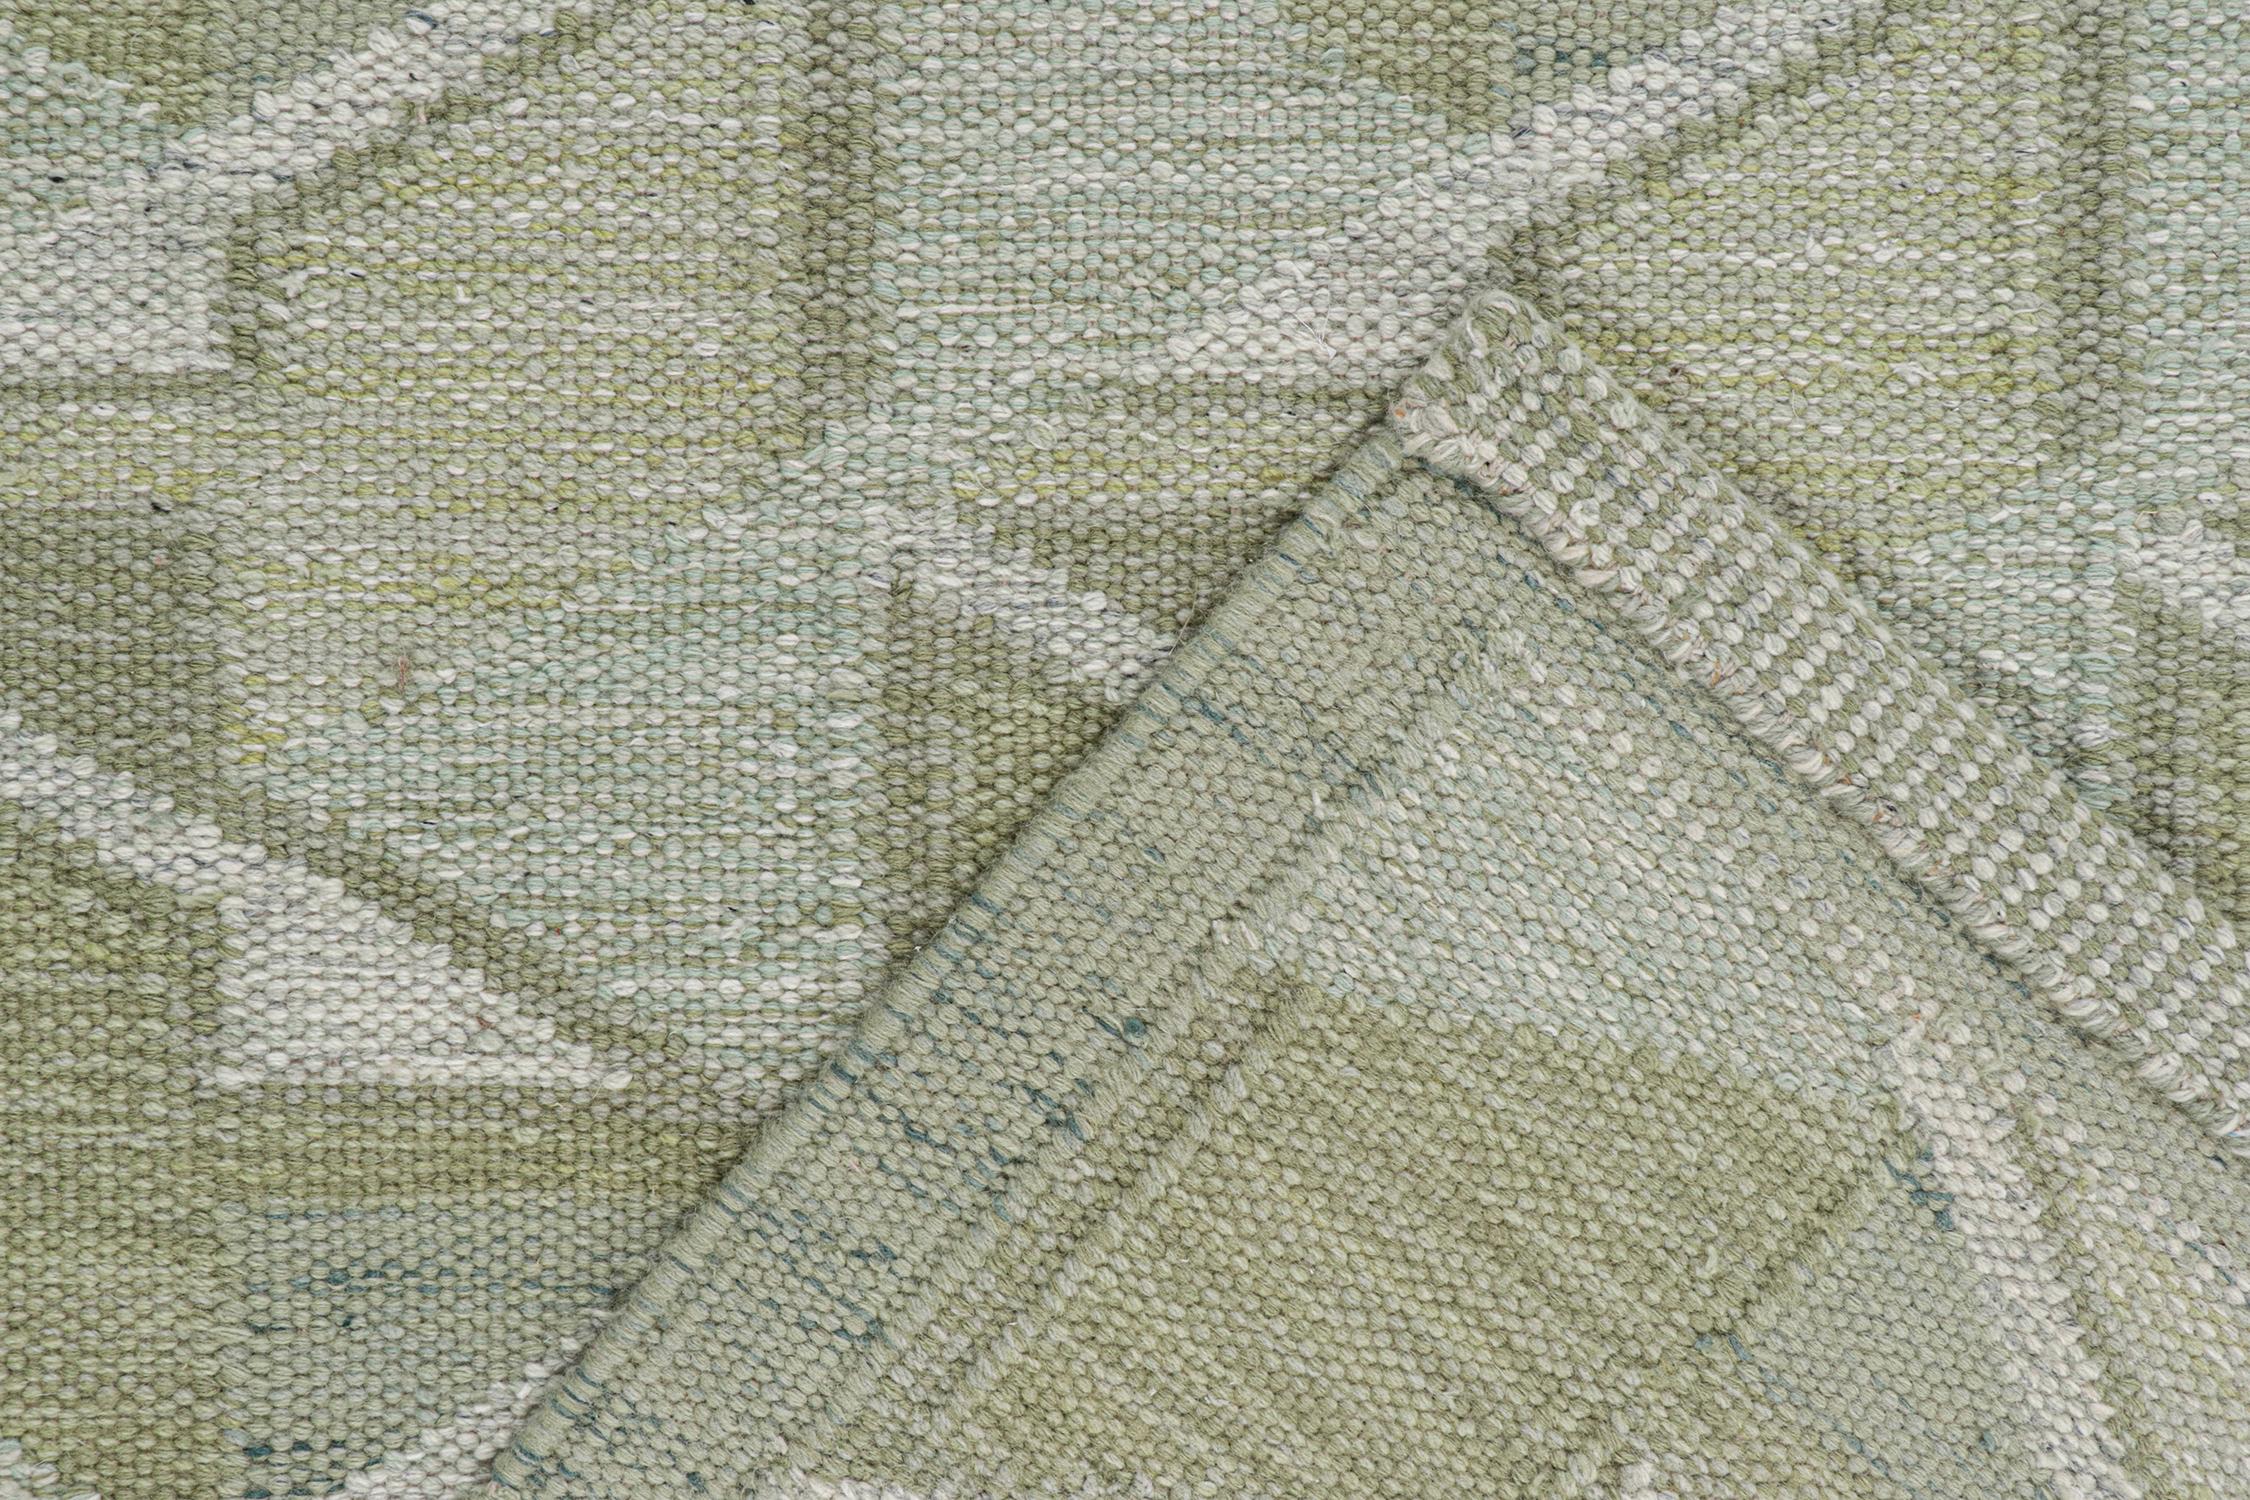 Contemporary Rug & Kilim’s Scandinavian Style Kilim in Green with Geometric Patterns